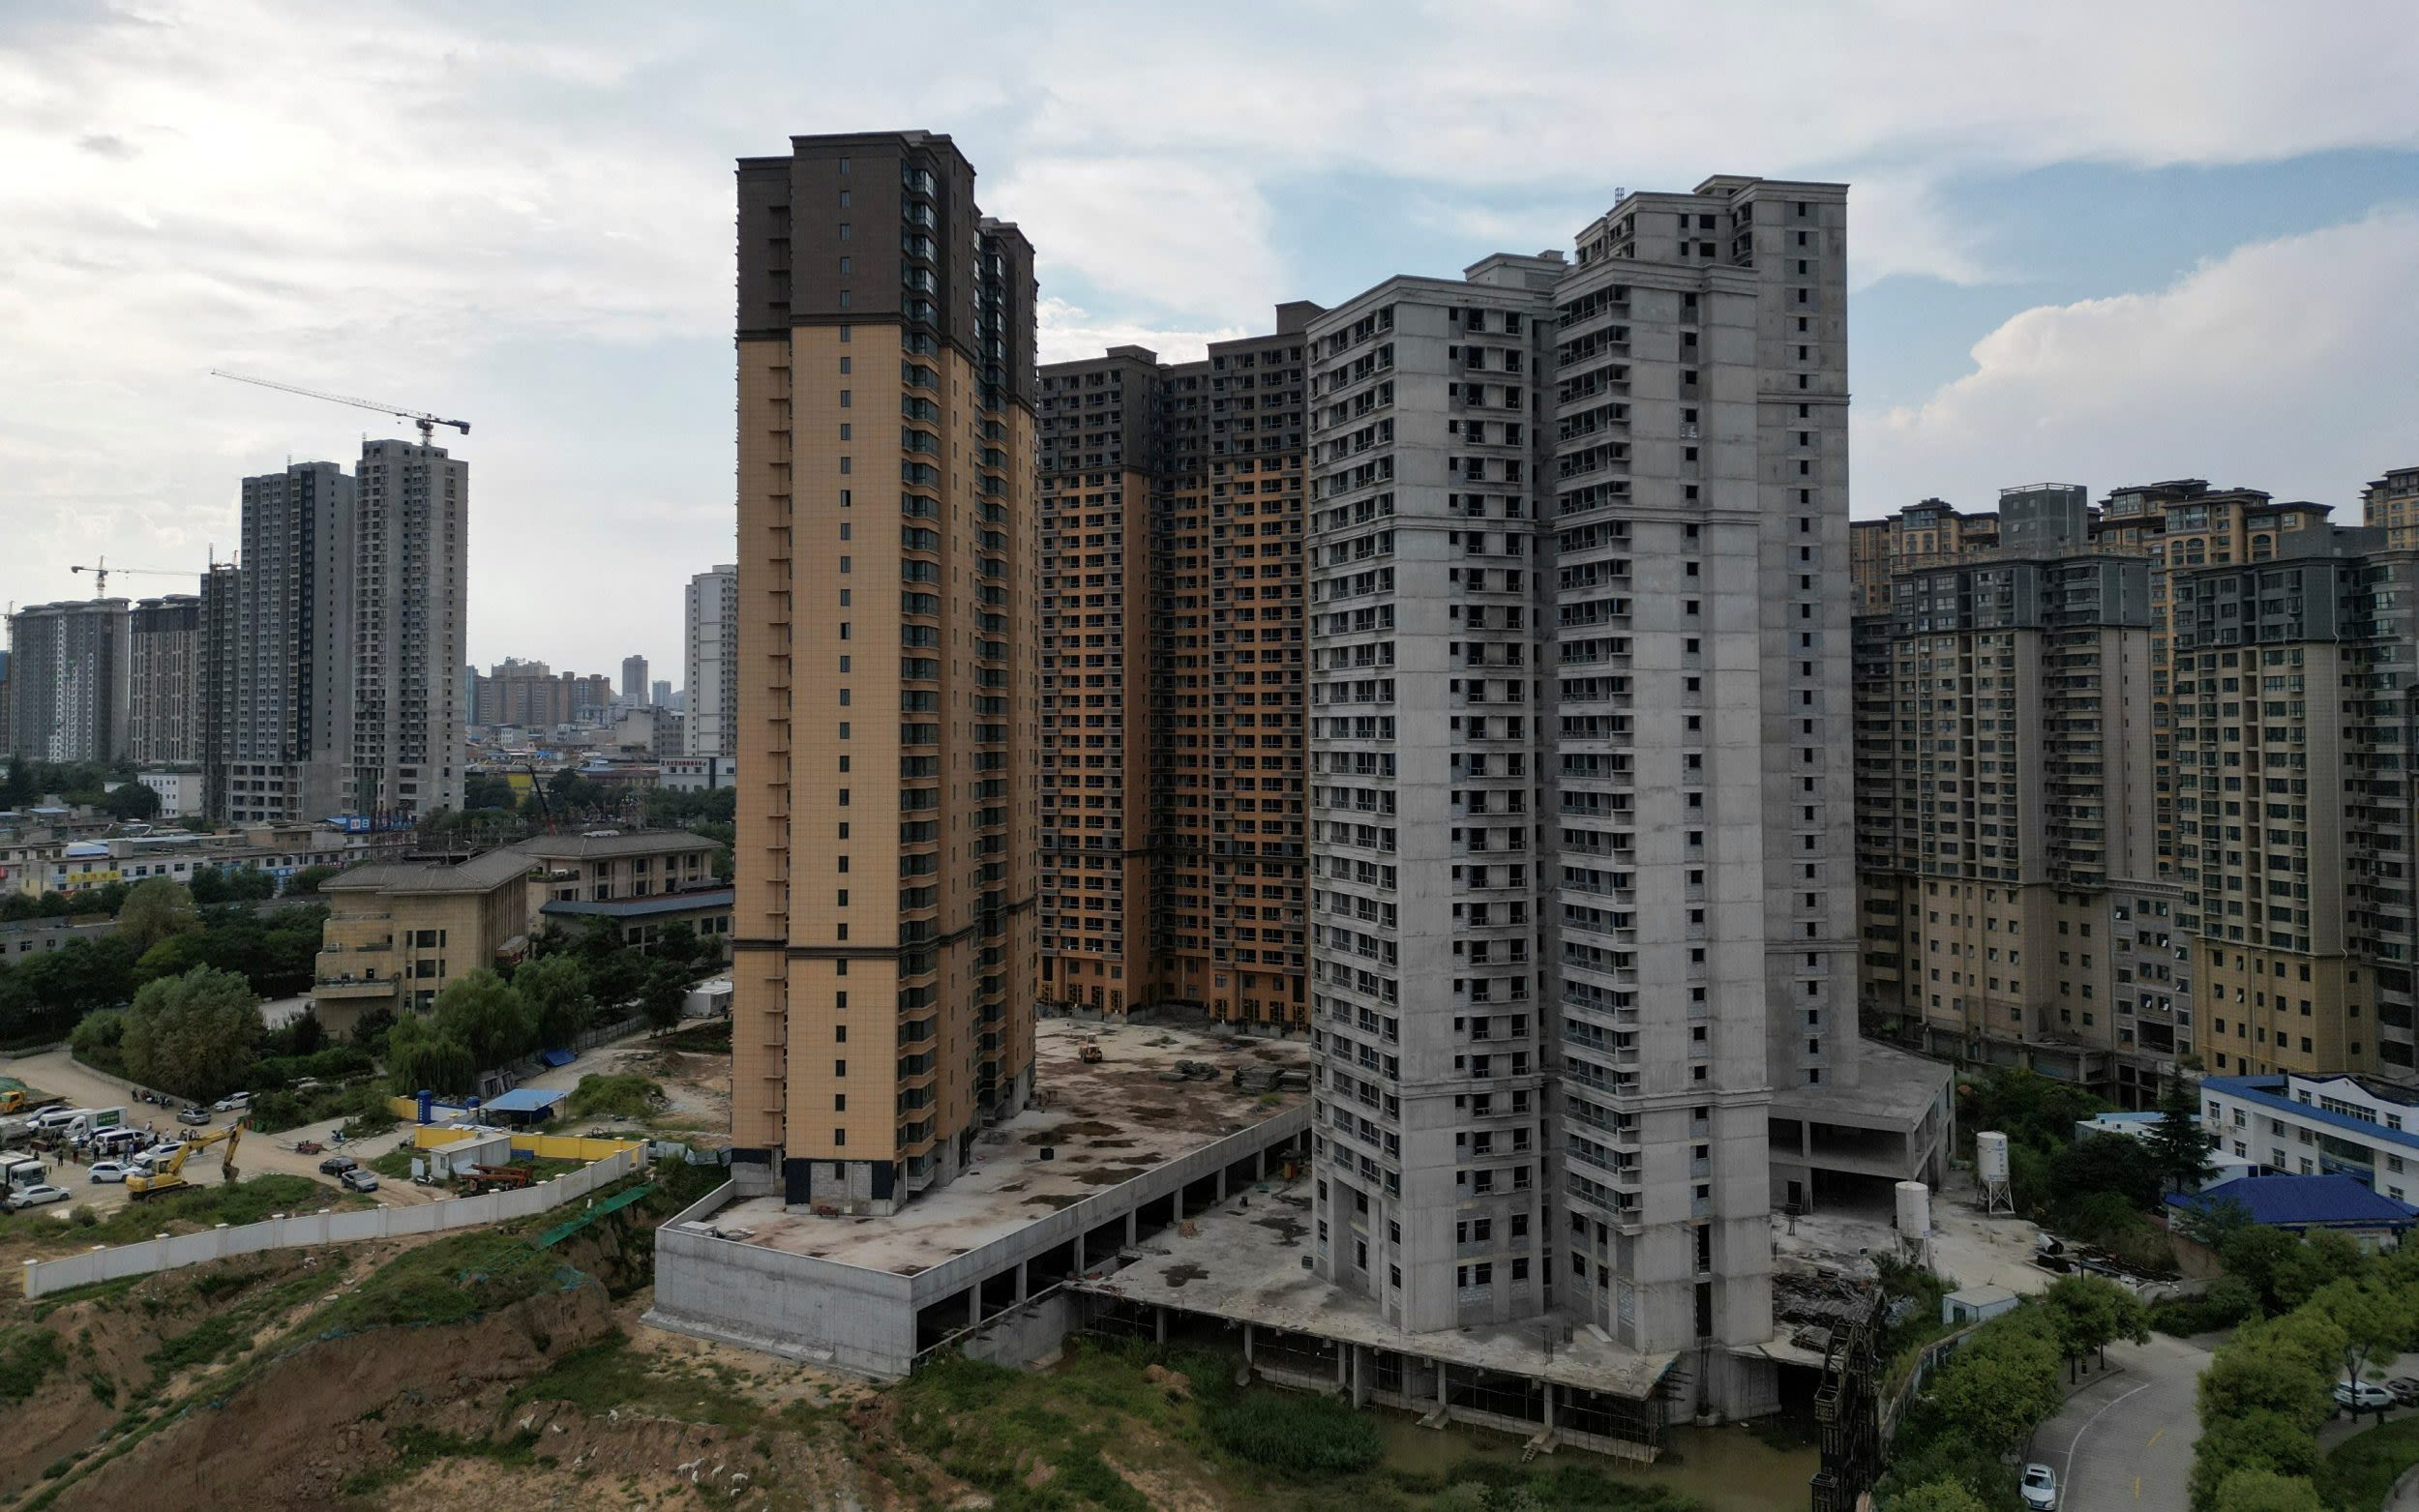 China plots to buy millions of unsold homes amid property crisis